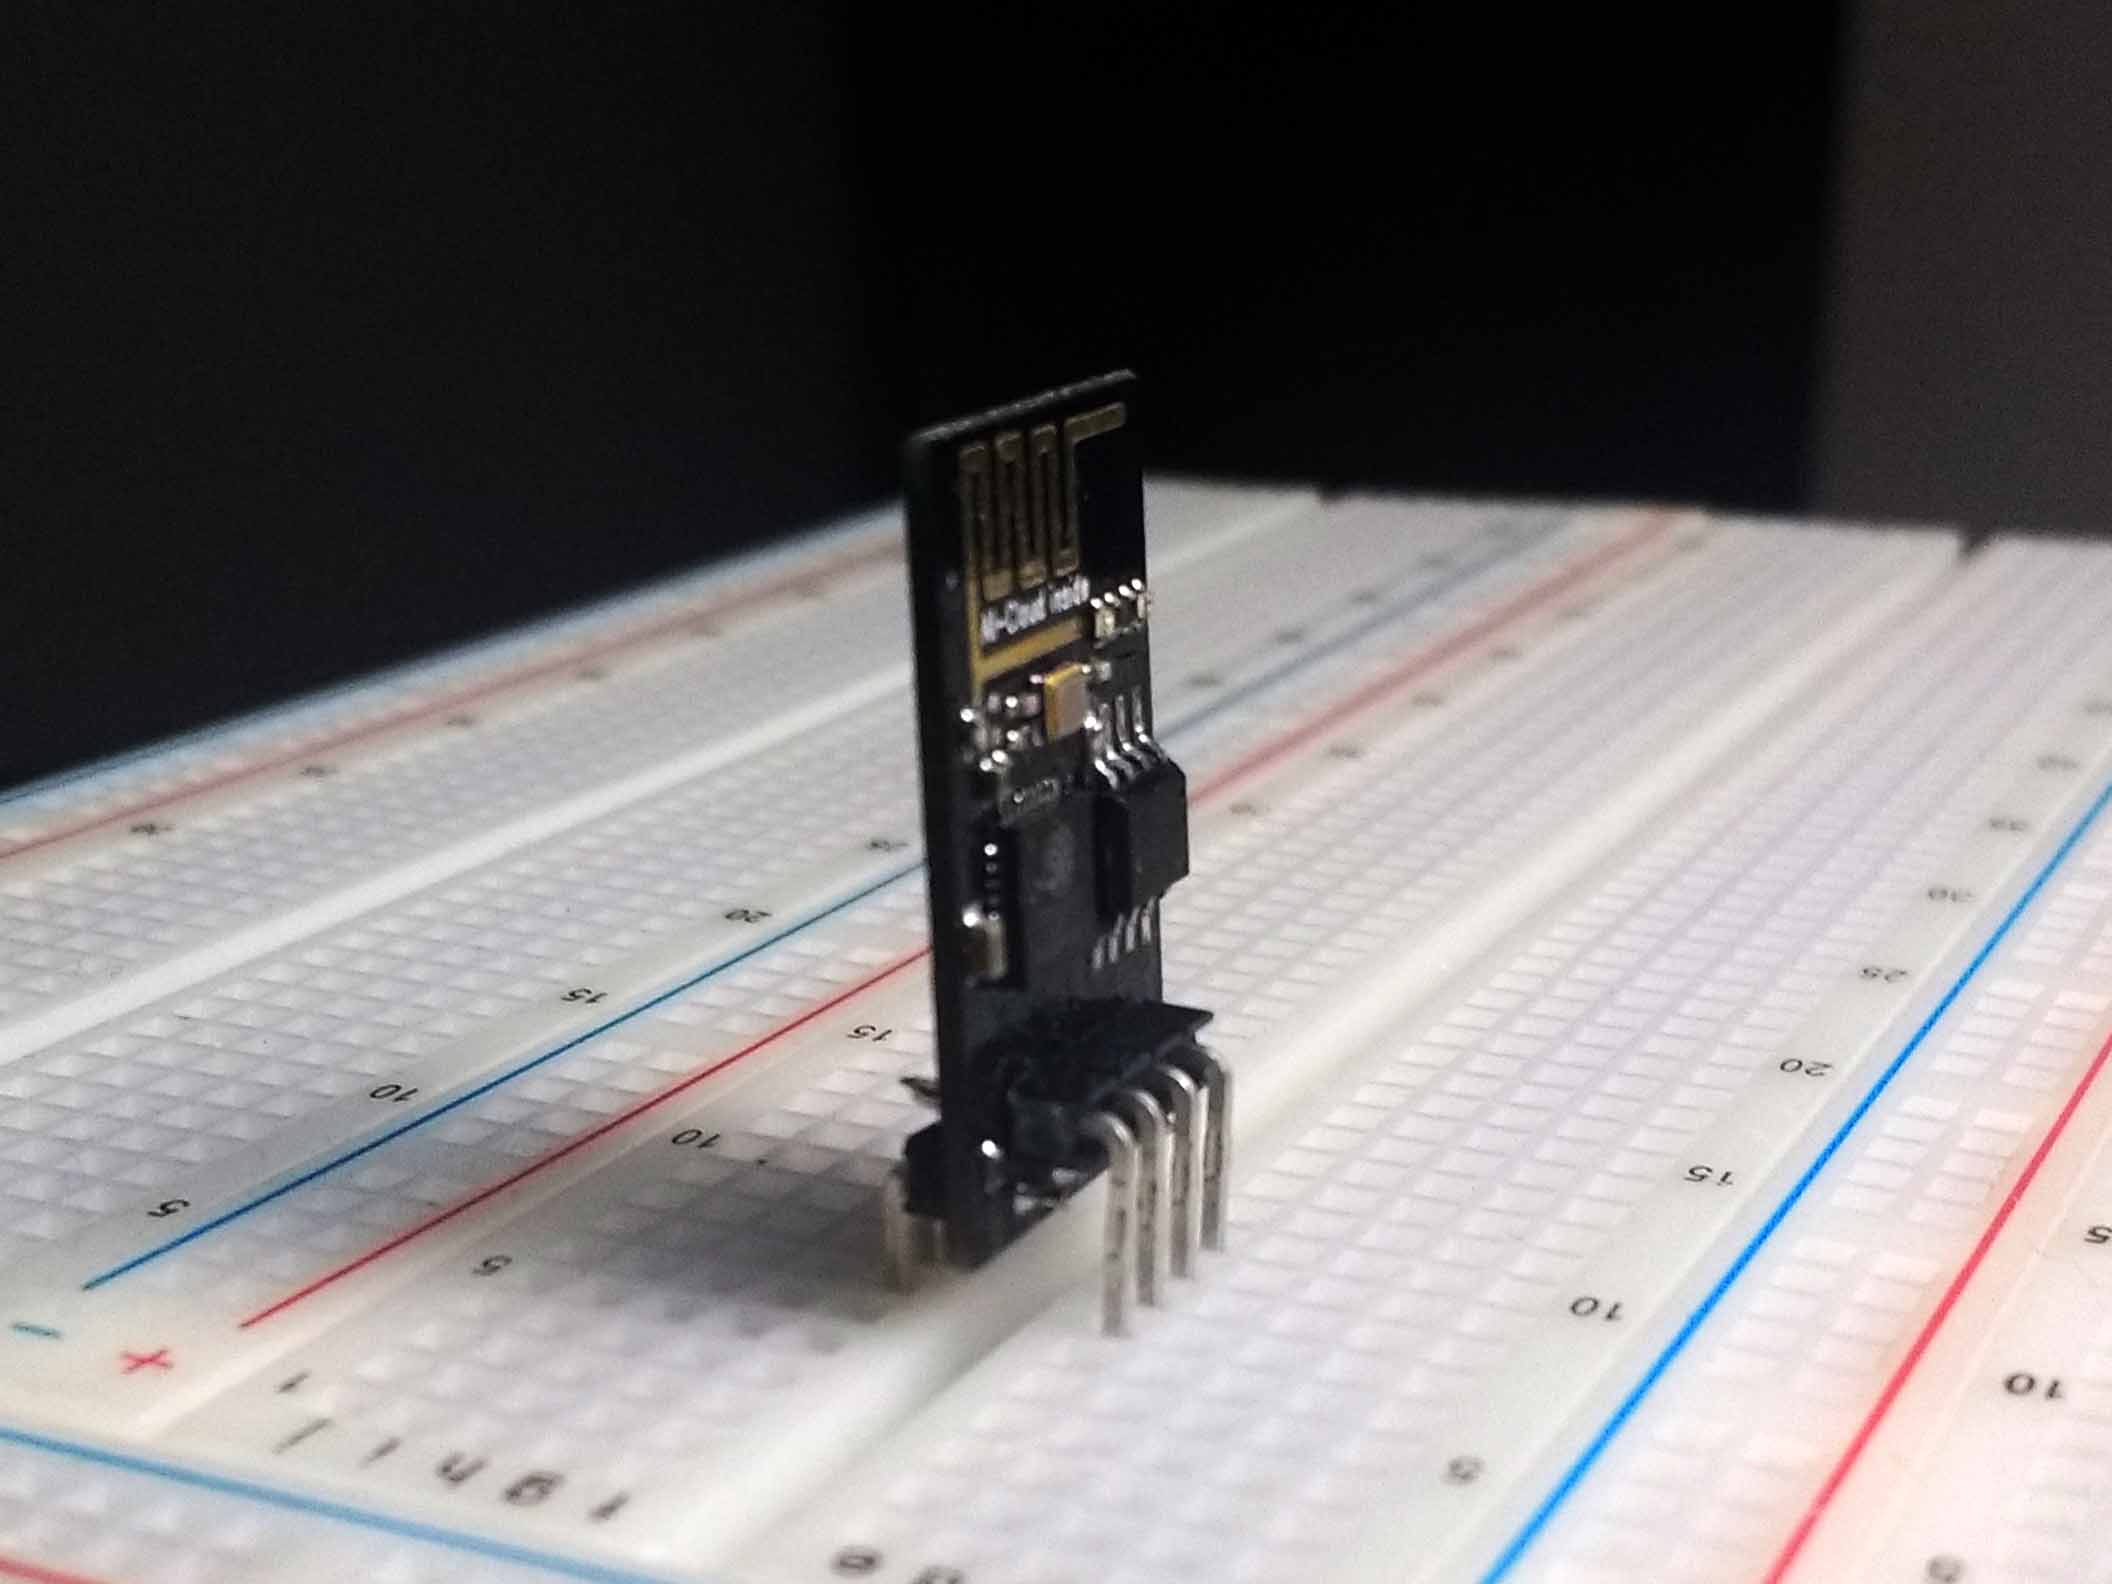 ESP-01 with L-shaped pins for breadboard compatibility